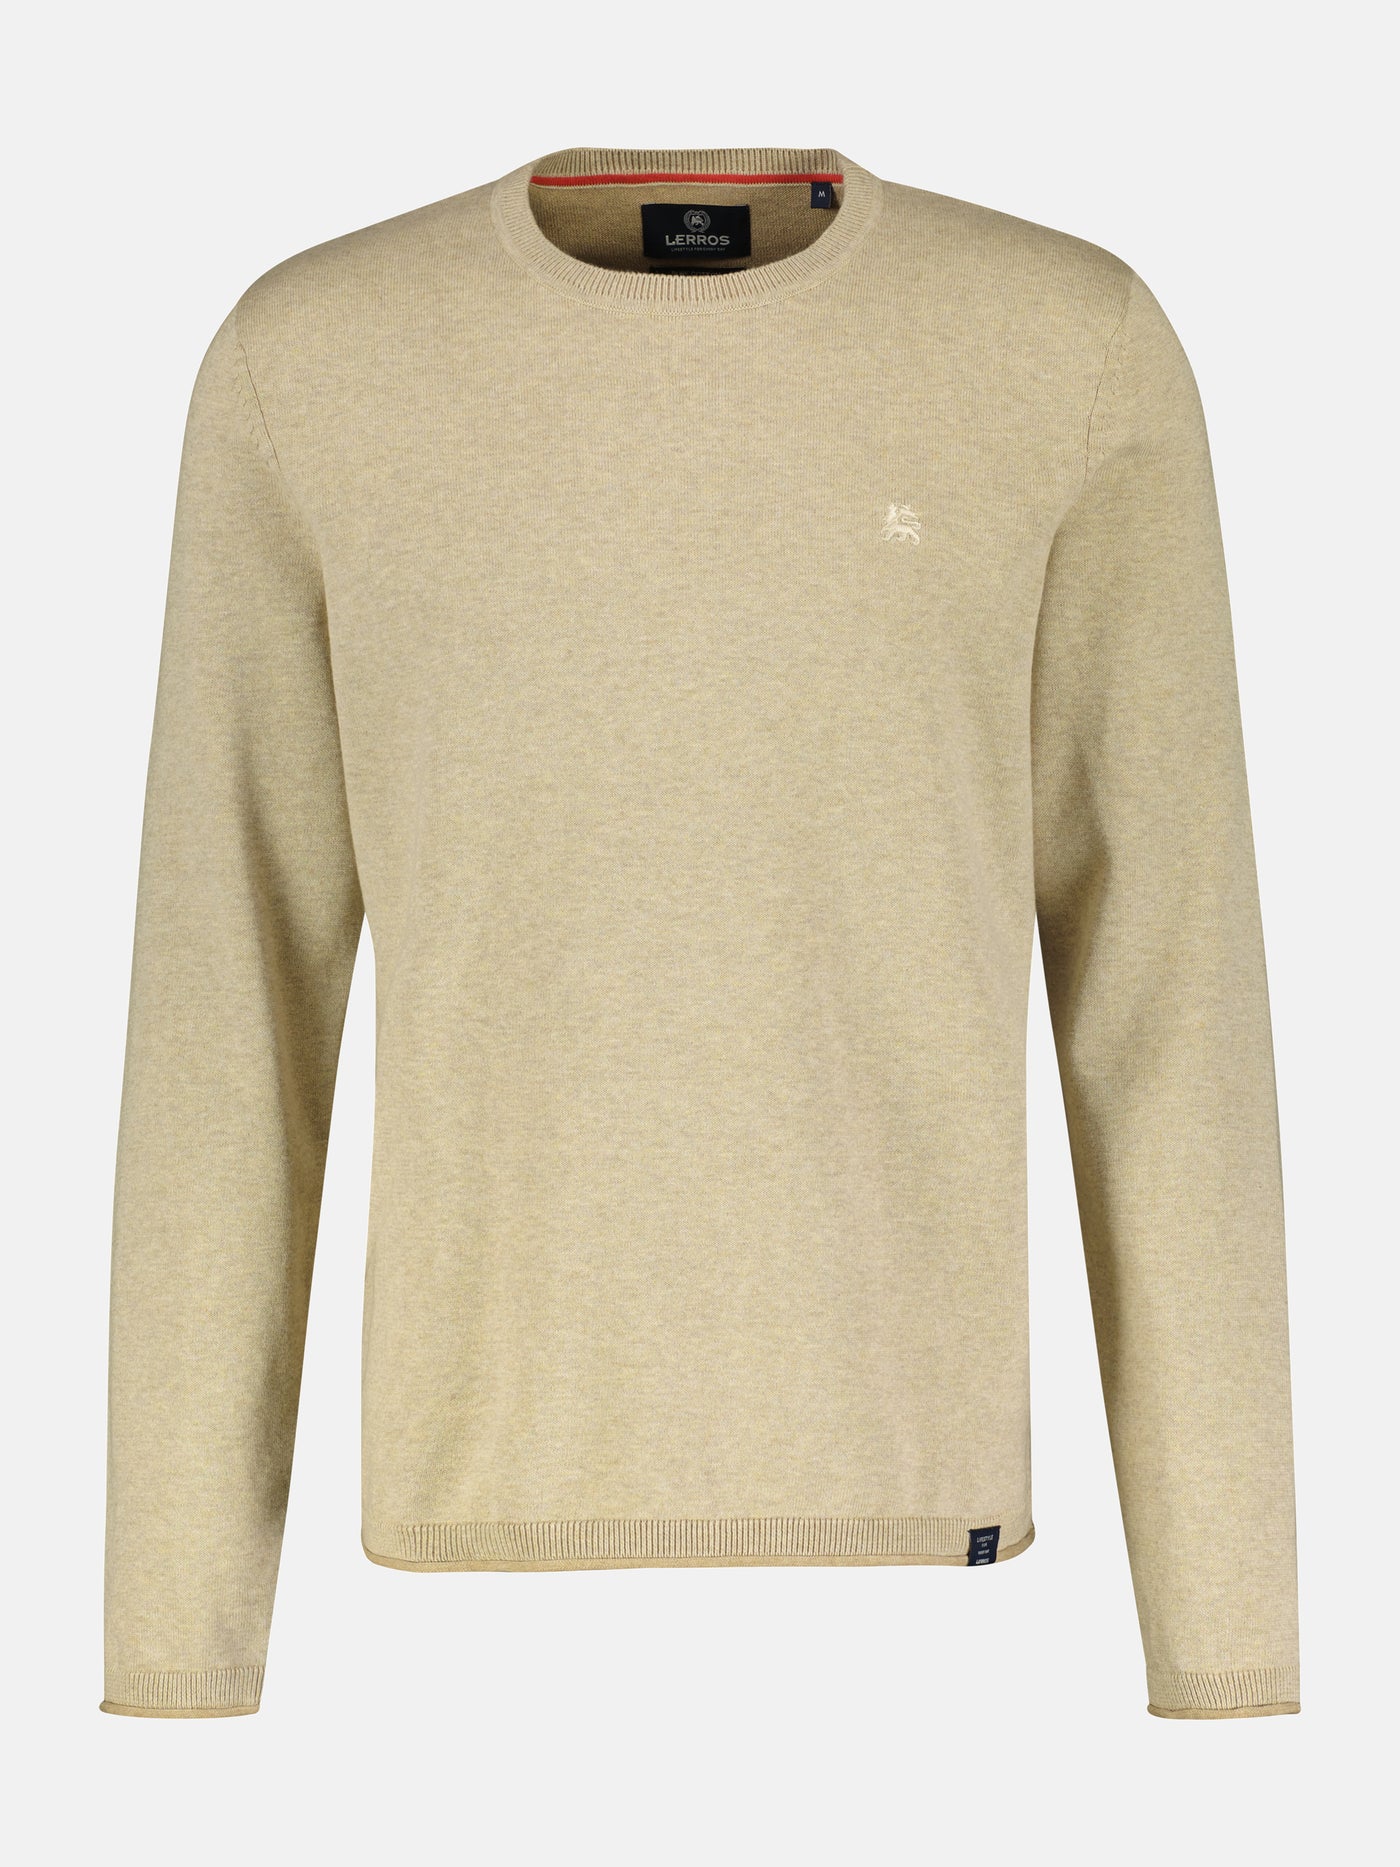 Flat knit sweater with a crew neck